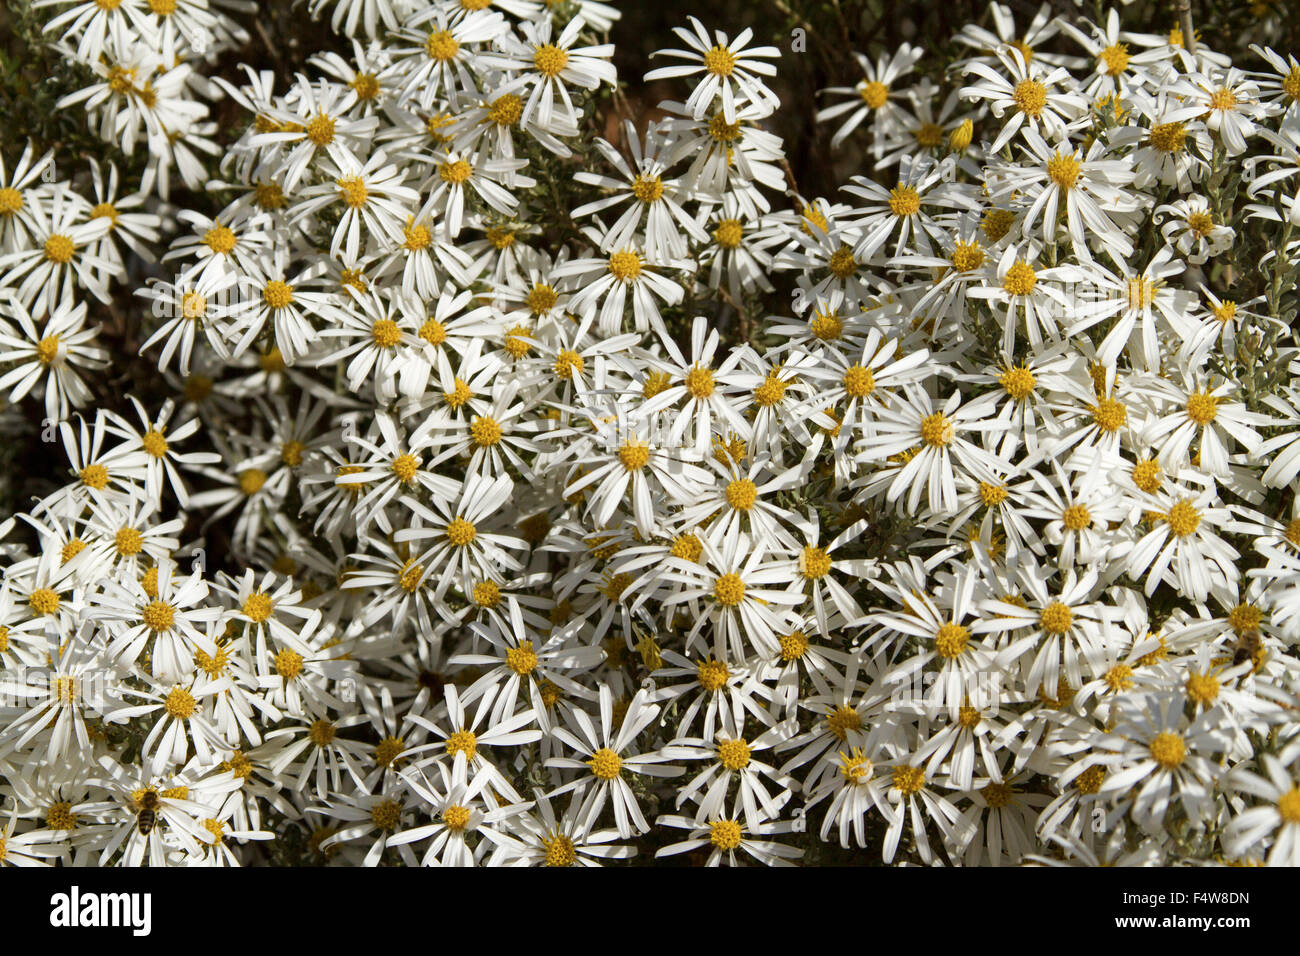 Mass of wildflowers, white daisies of Olearia pimeleoides, mallee daisy bush growing in outback South Australia Stock Photo